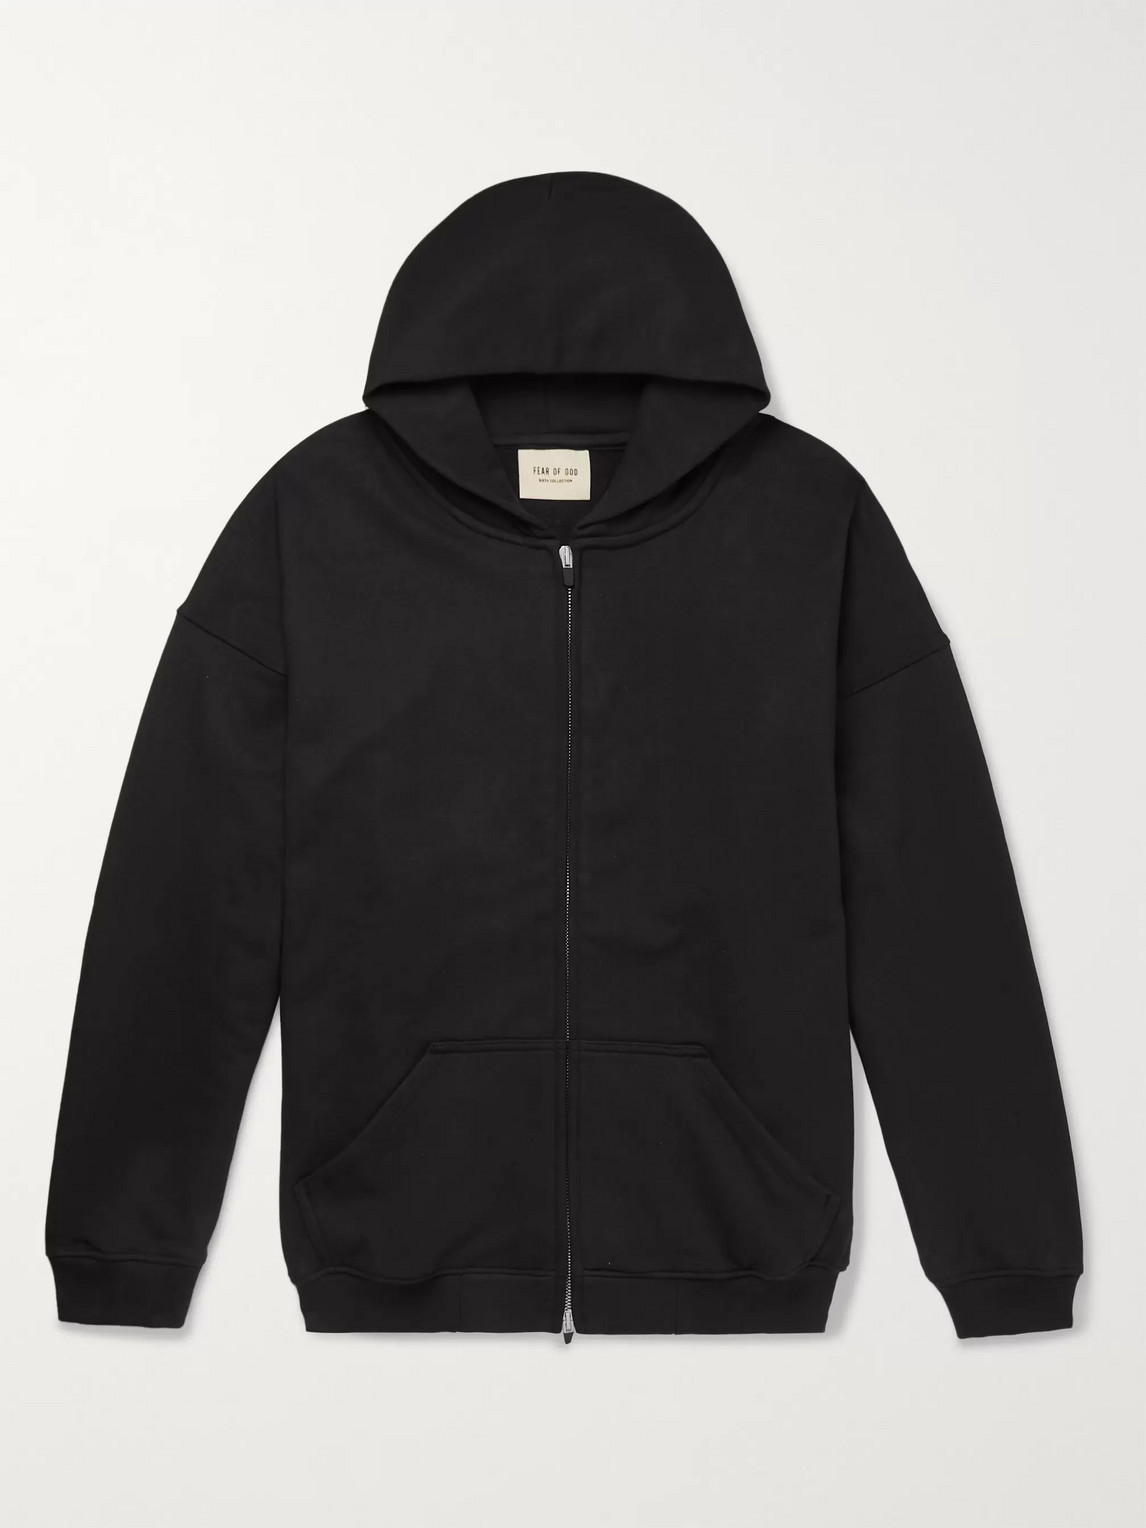 FEAR OF GOD LOOPBACK COTTON-JERSEY ZIP-UP HOODIE